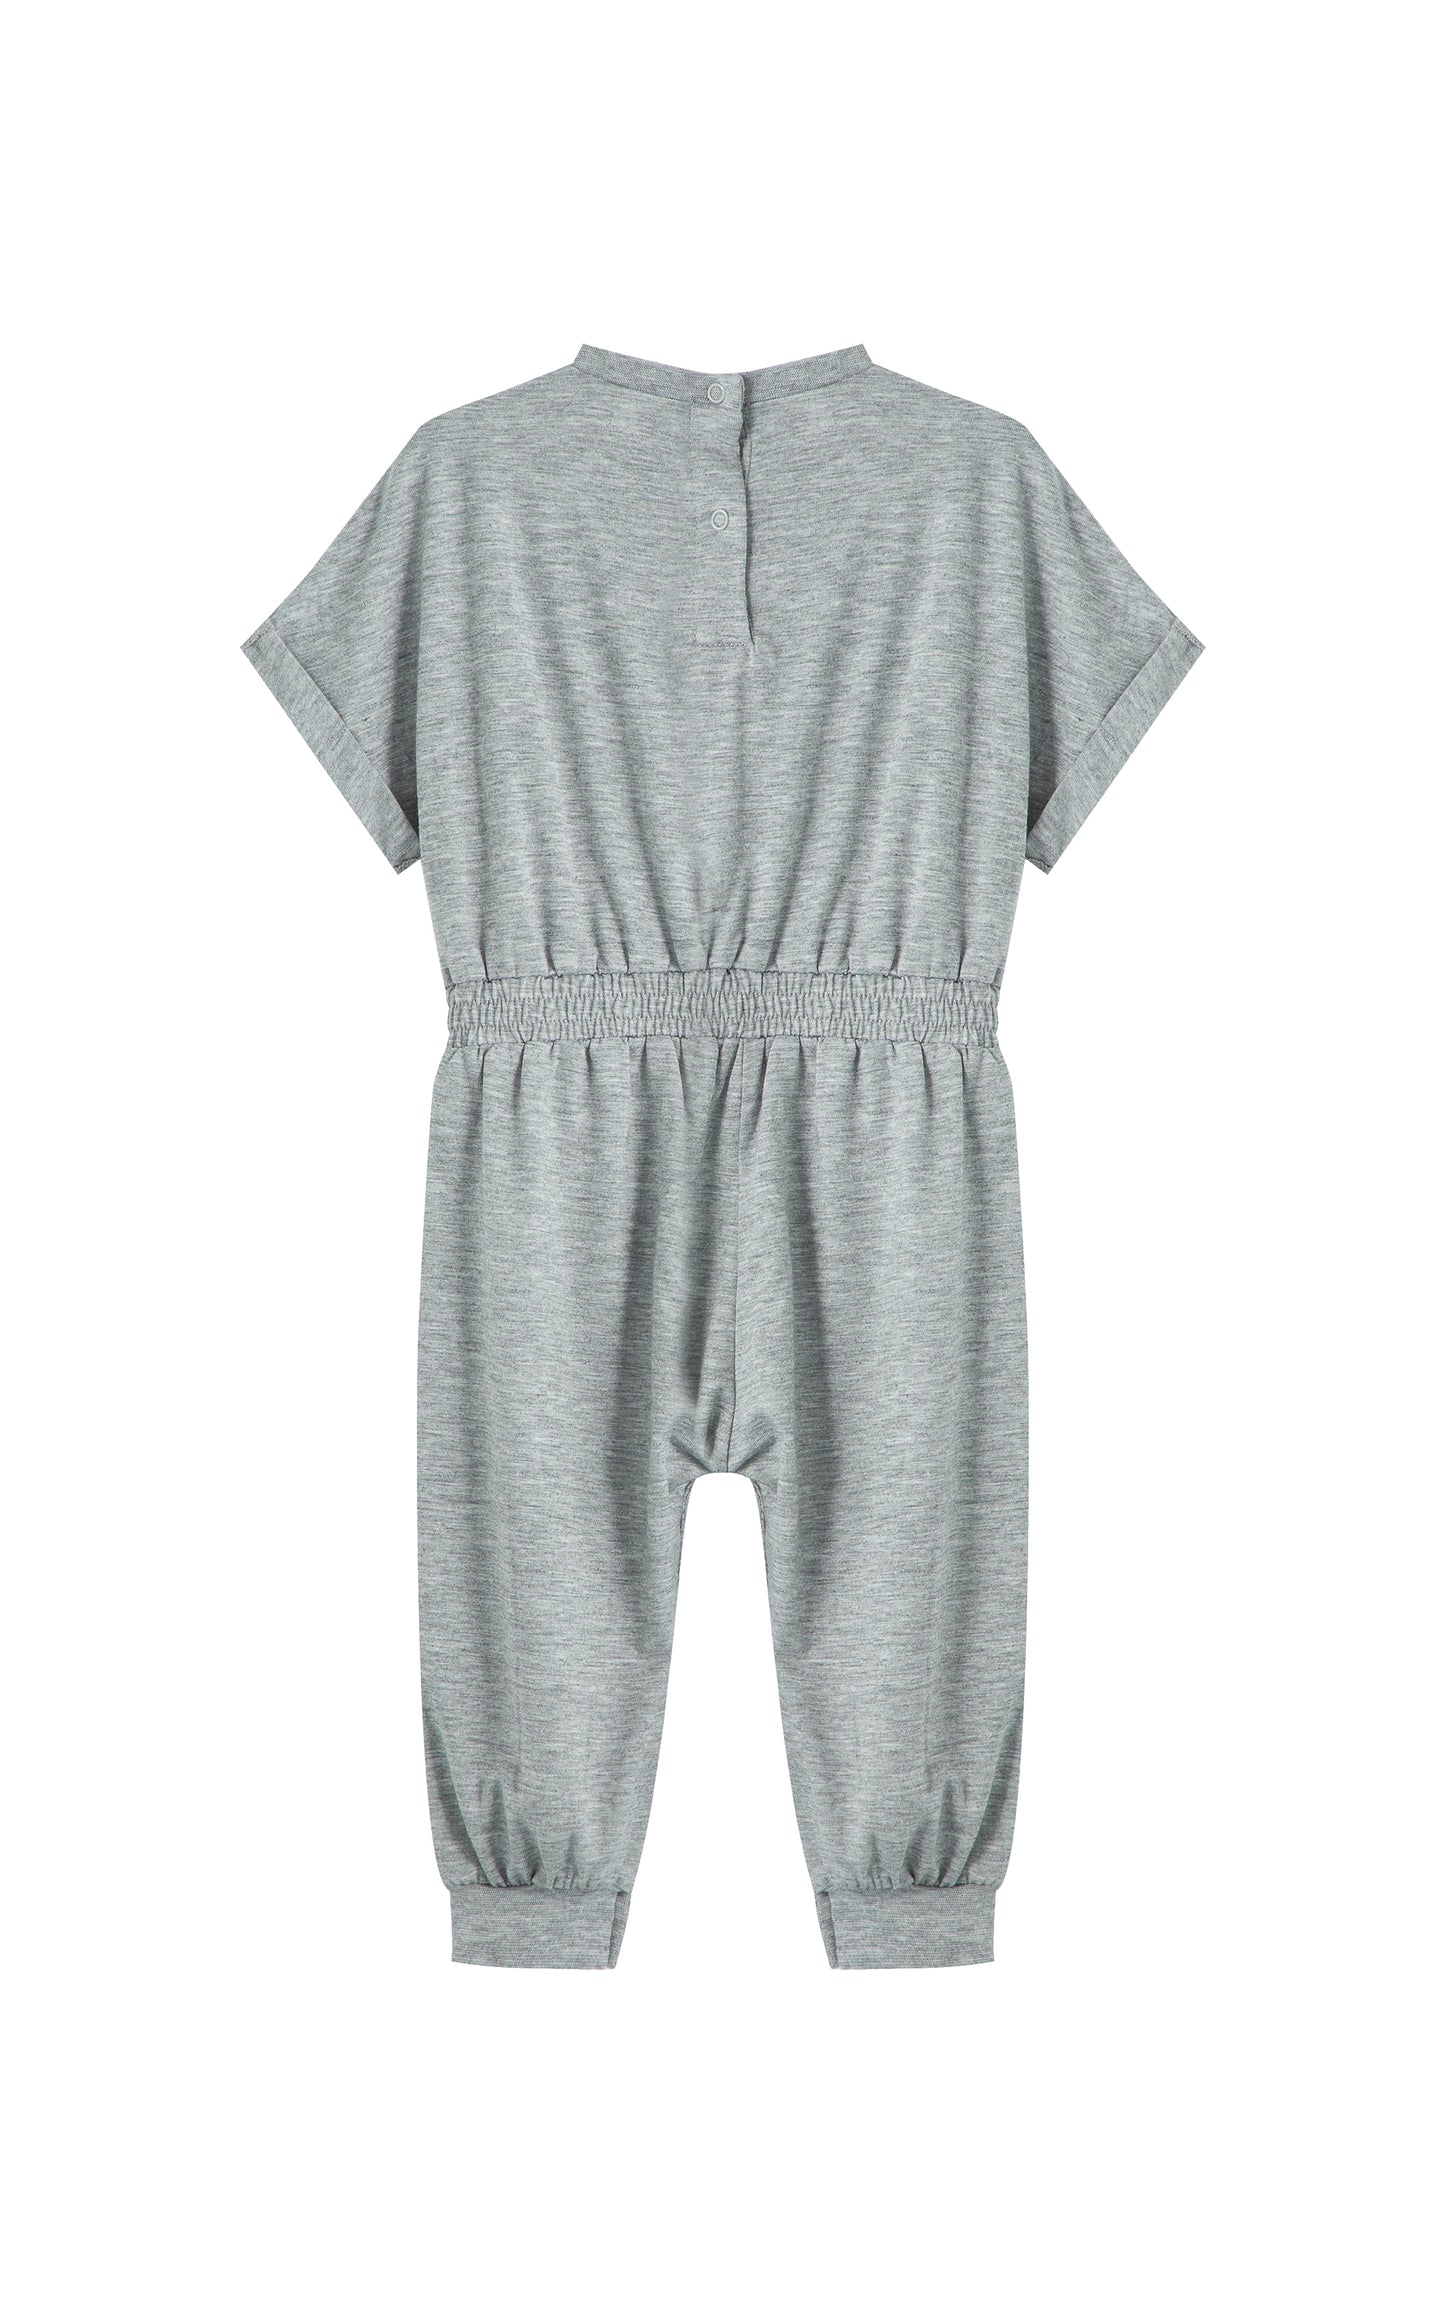 Back view of gray romper with folded cuff sleeves.